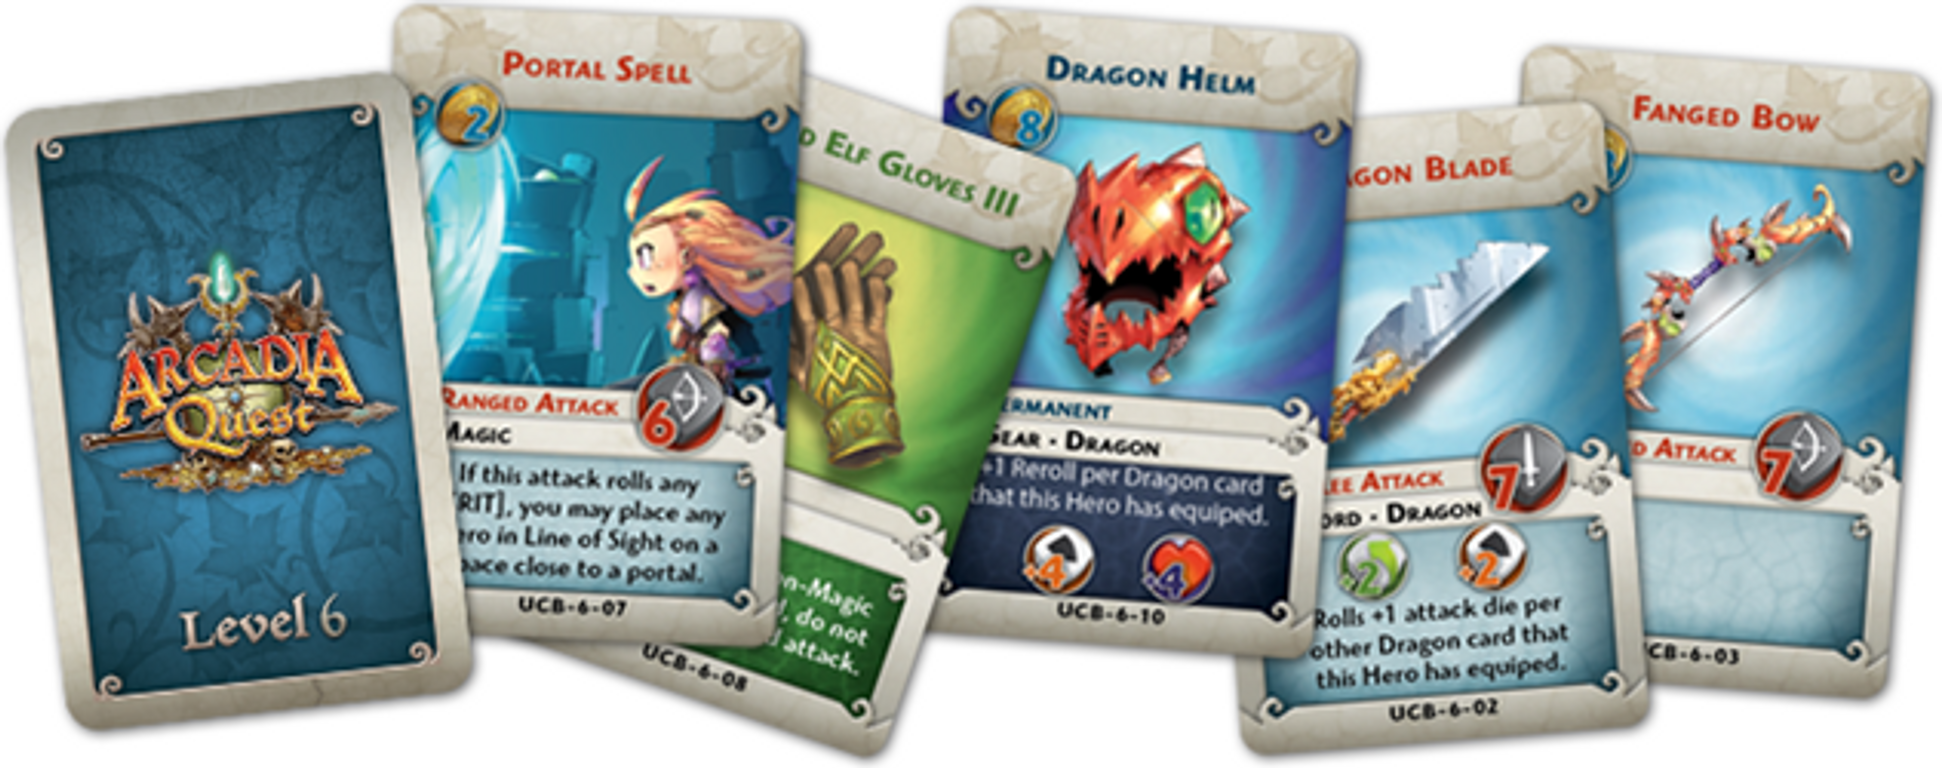 Arcadia Quest: Chaos Dragon cards